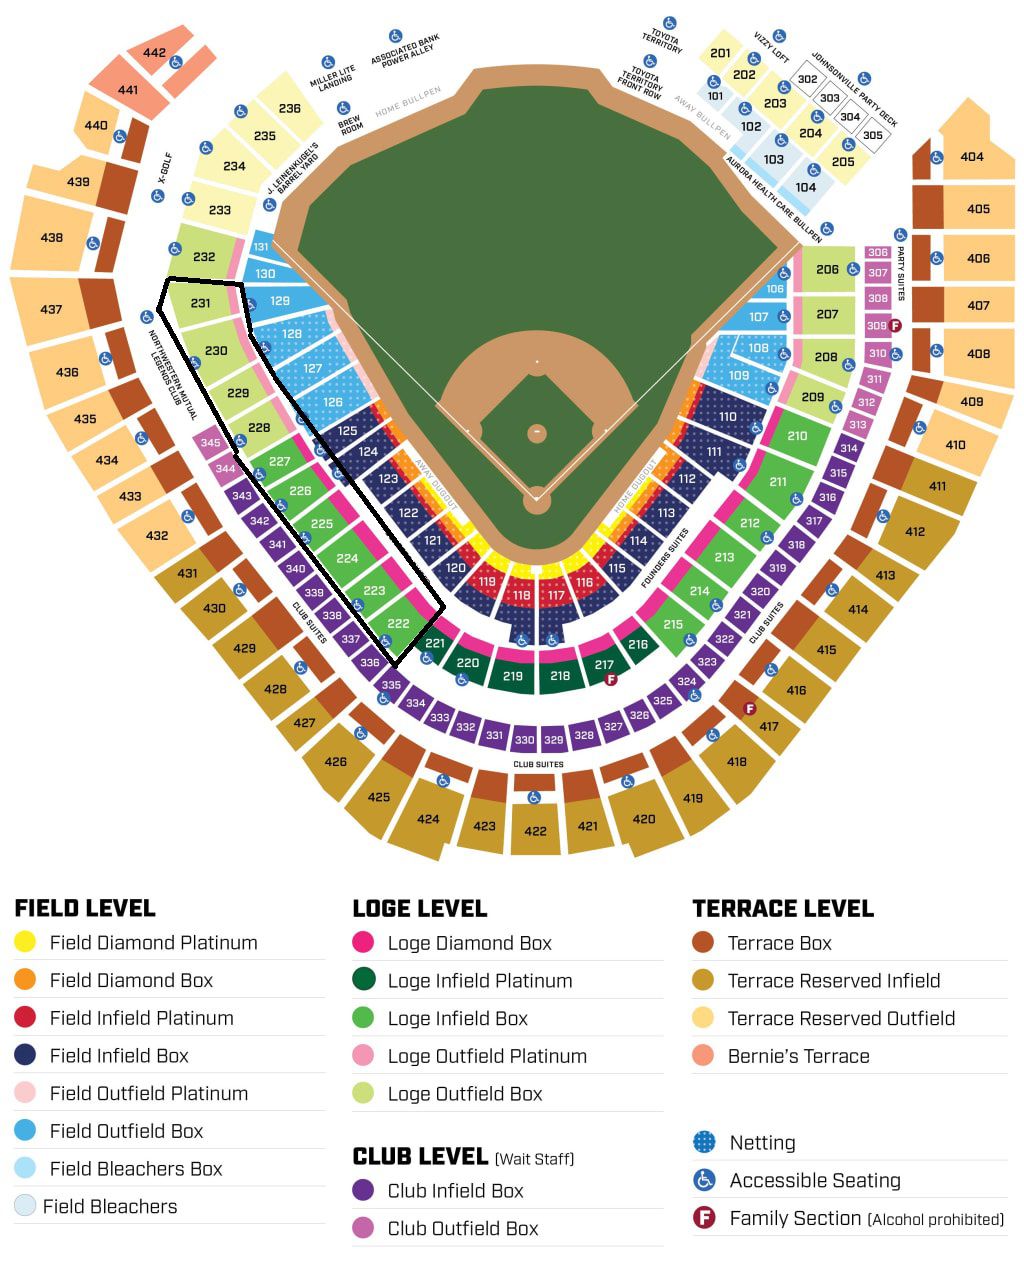 Sections 222 to 231. American Family Field.